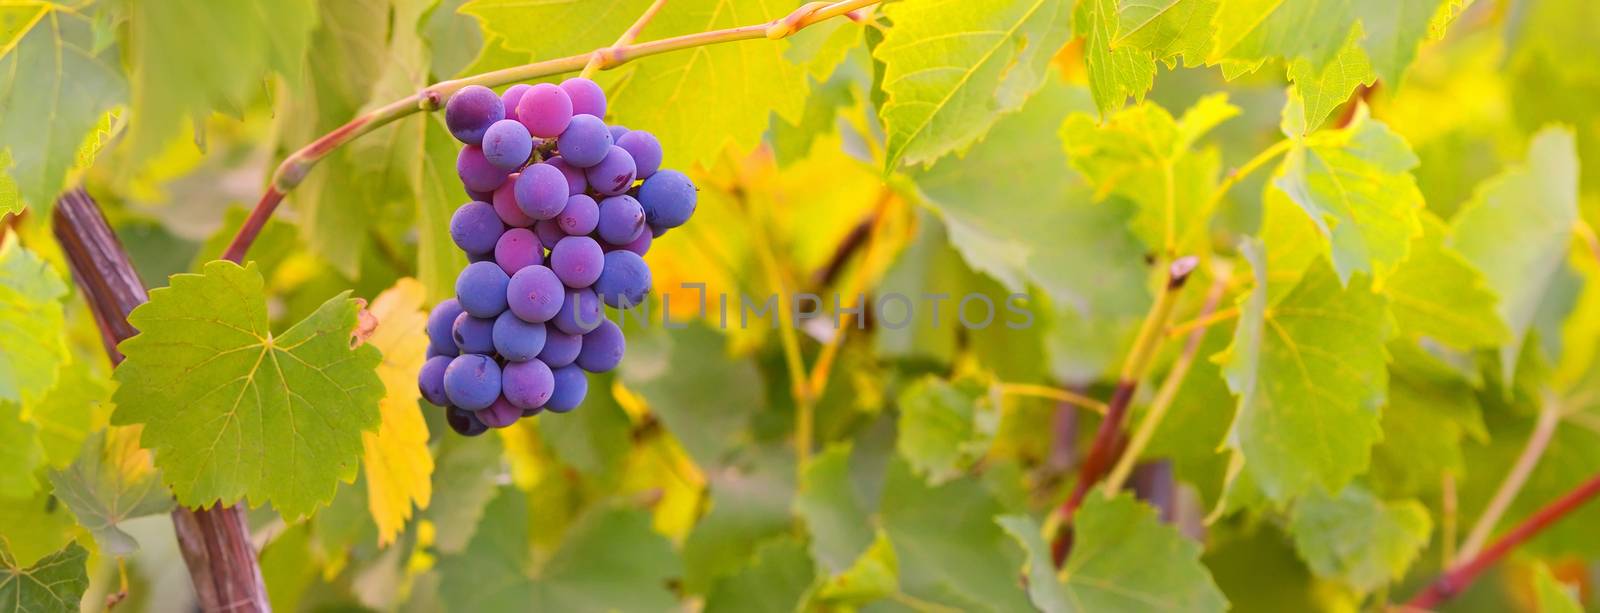 Ripe grapes with green leaves